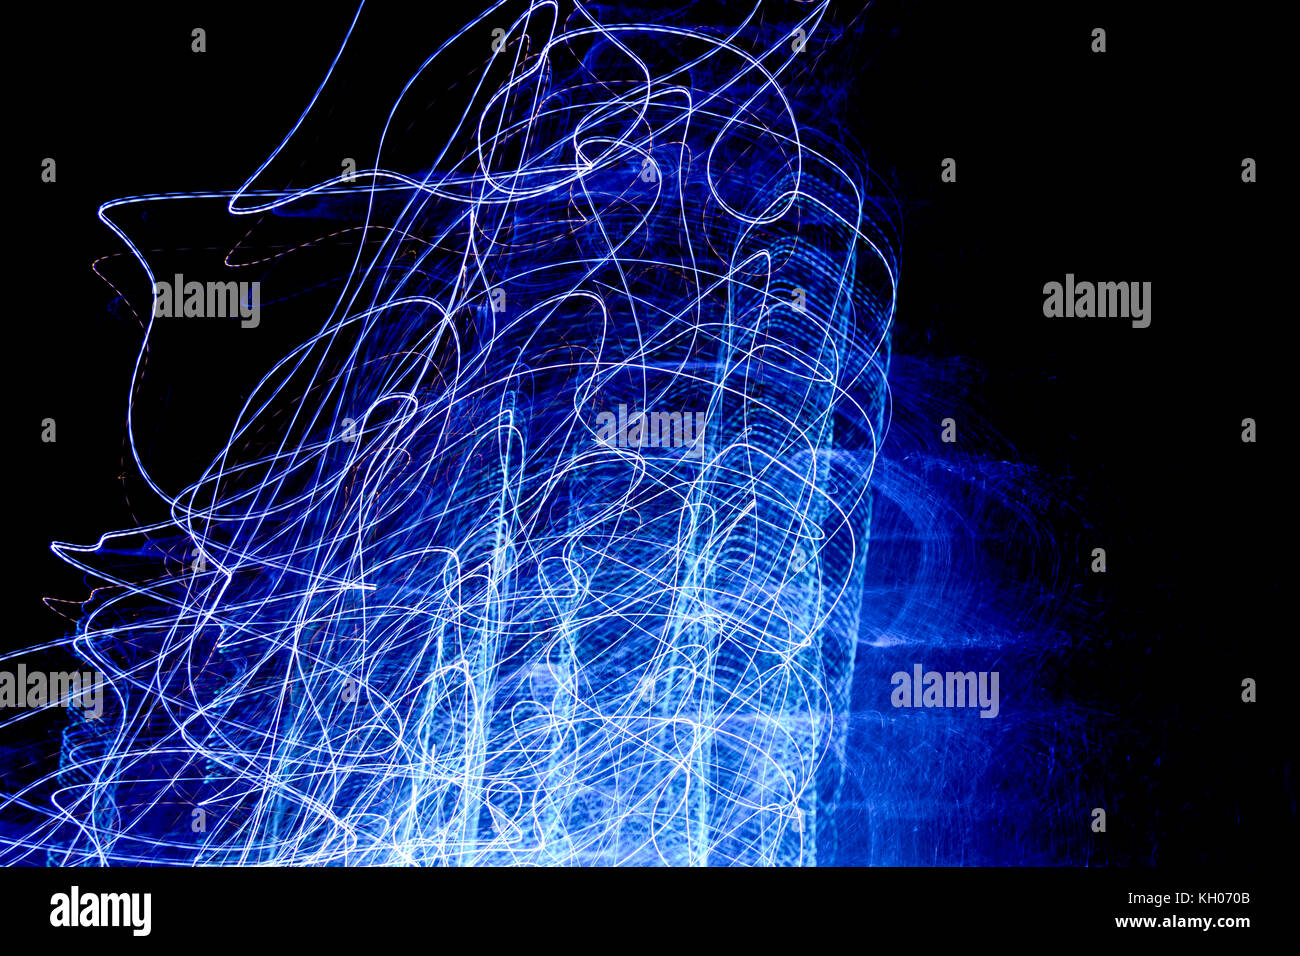 wires of blue lights like sparks caused by an electric shock following a short circuit Stock Photo